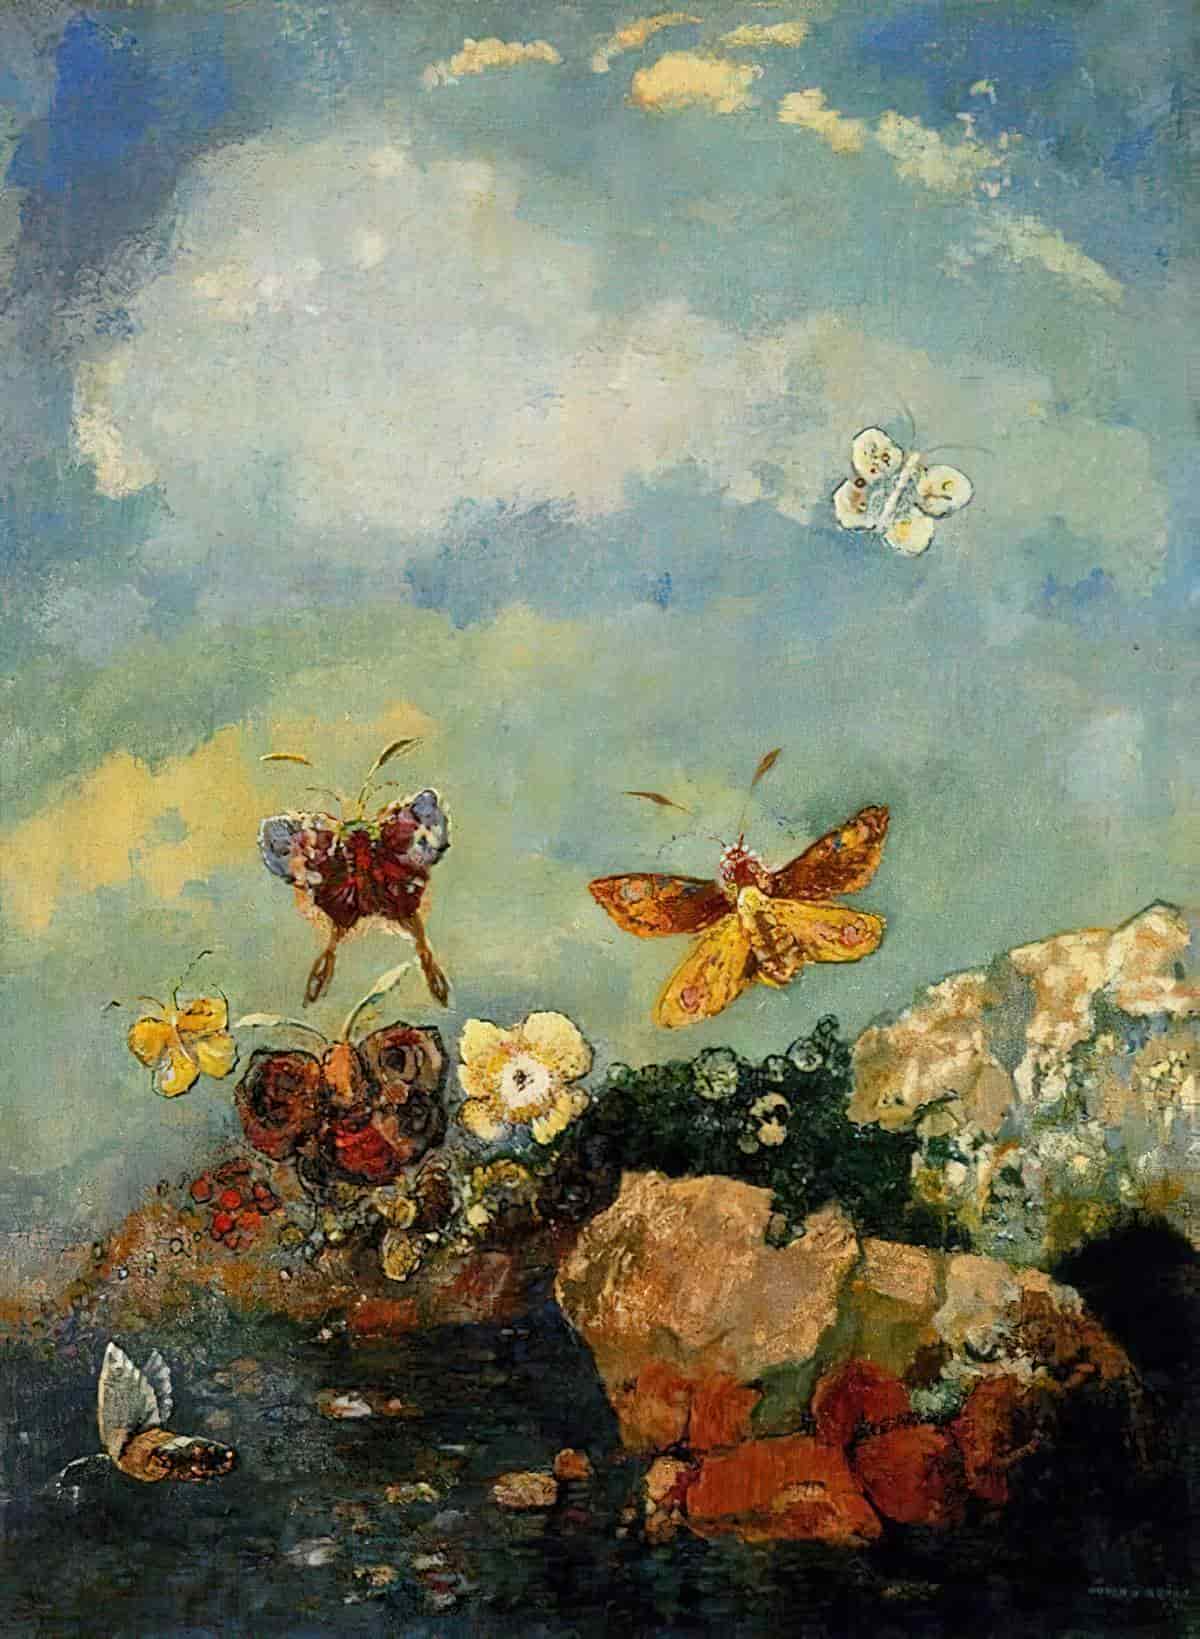 What do butterflies symbolize in literature?